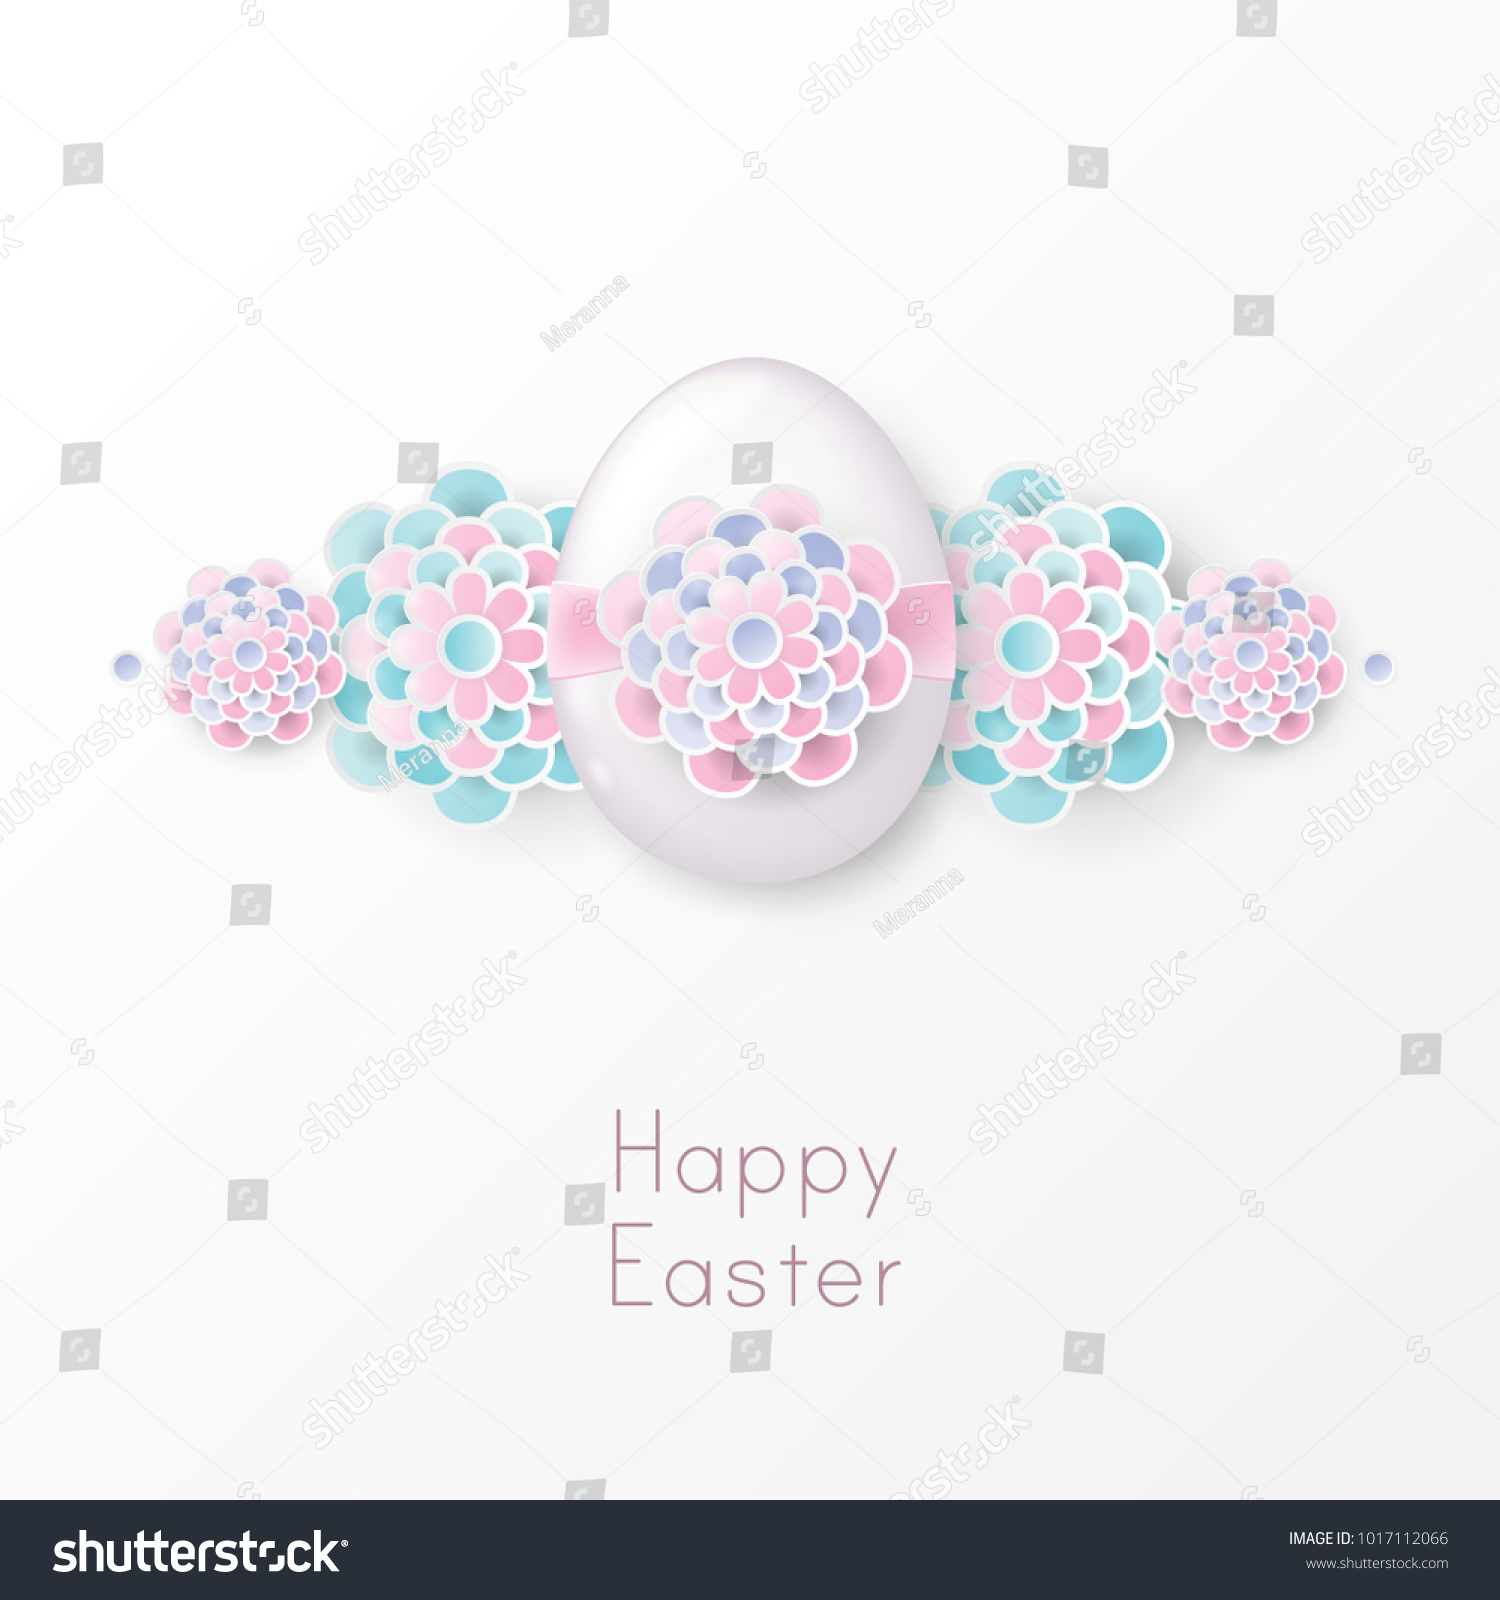 Happy Easter Elegant Floral Background 3d Stock Vector HD (Royalty ...